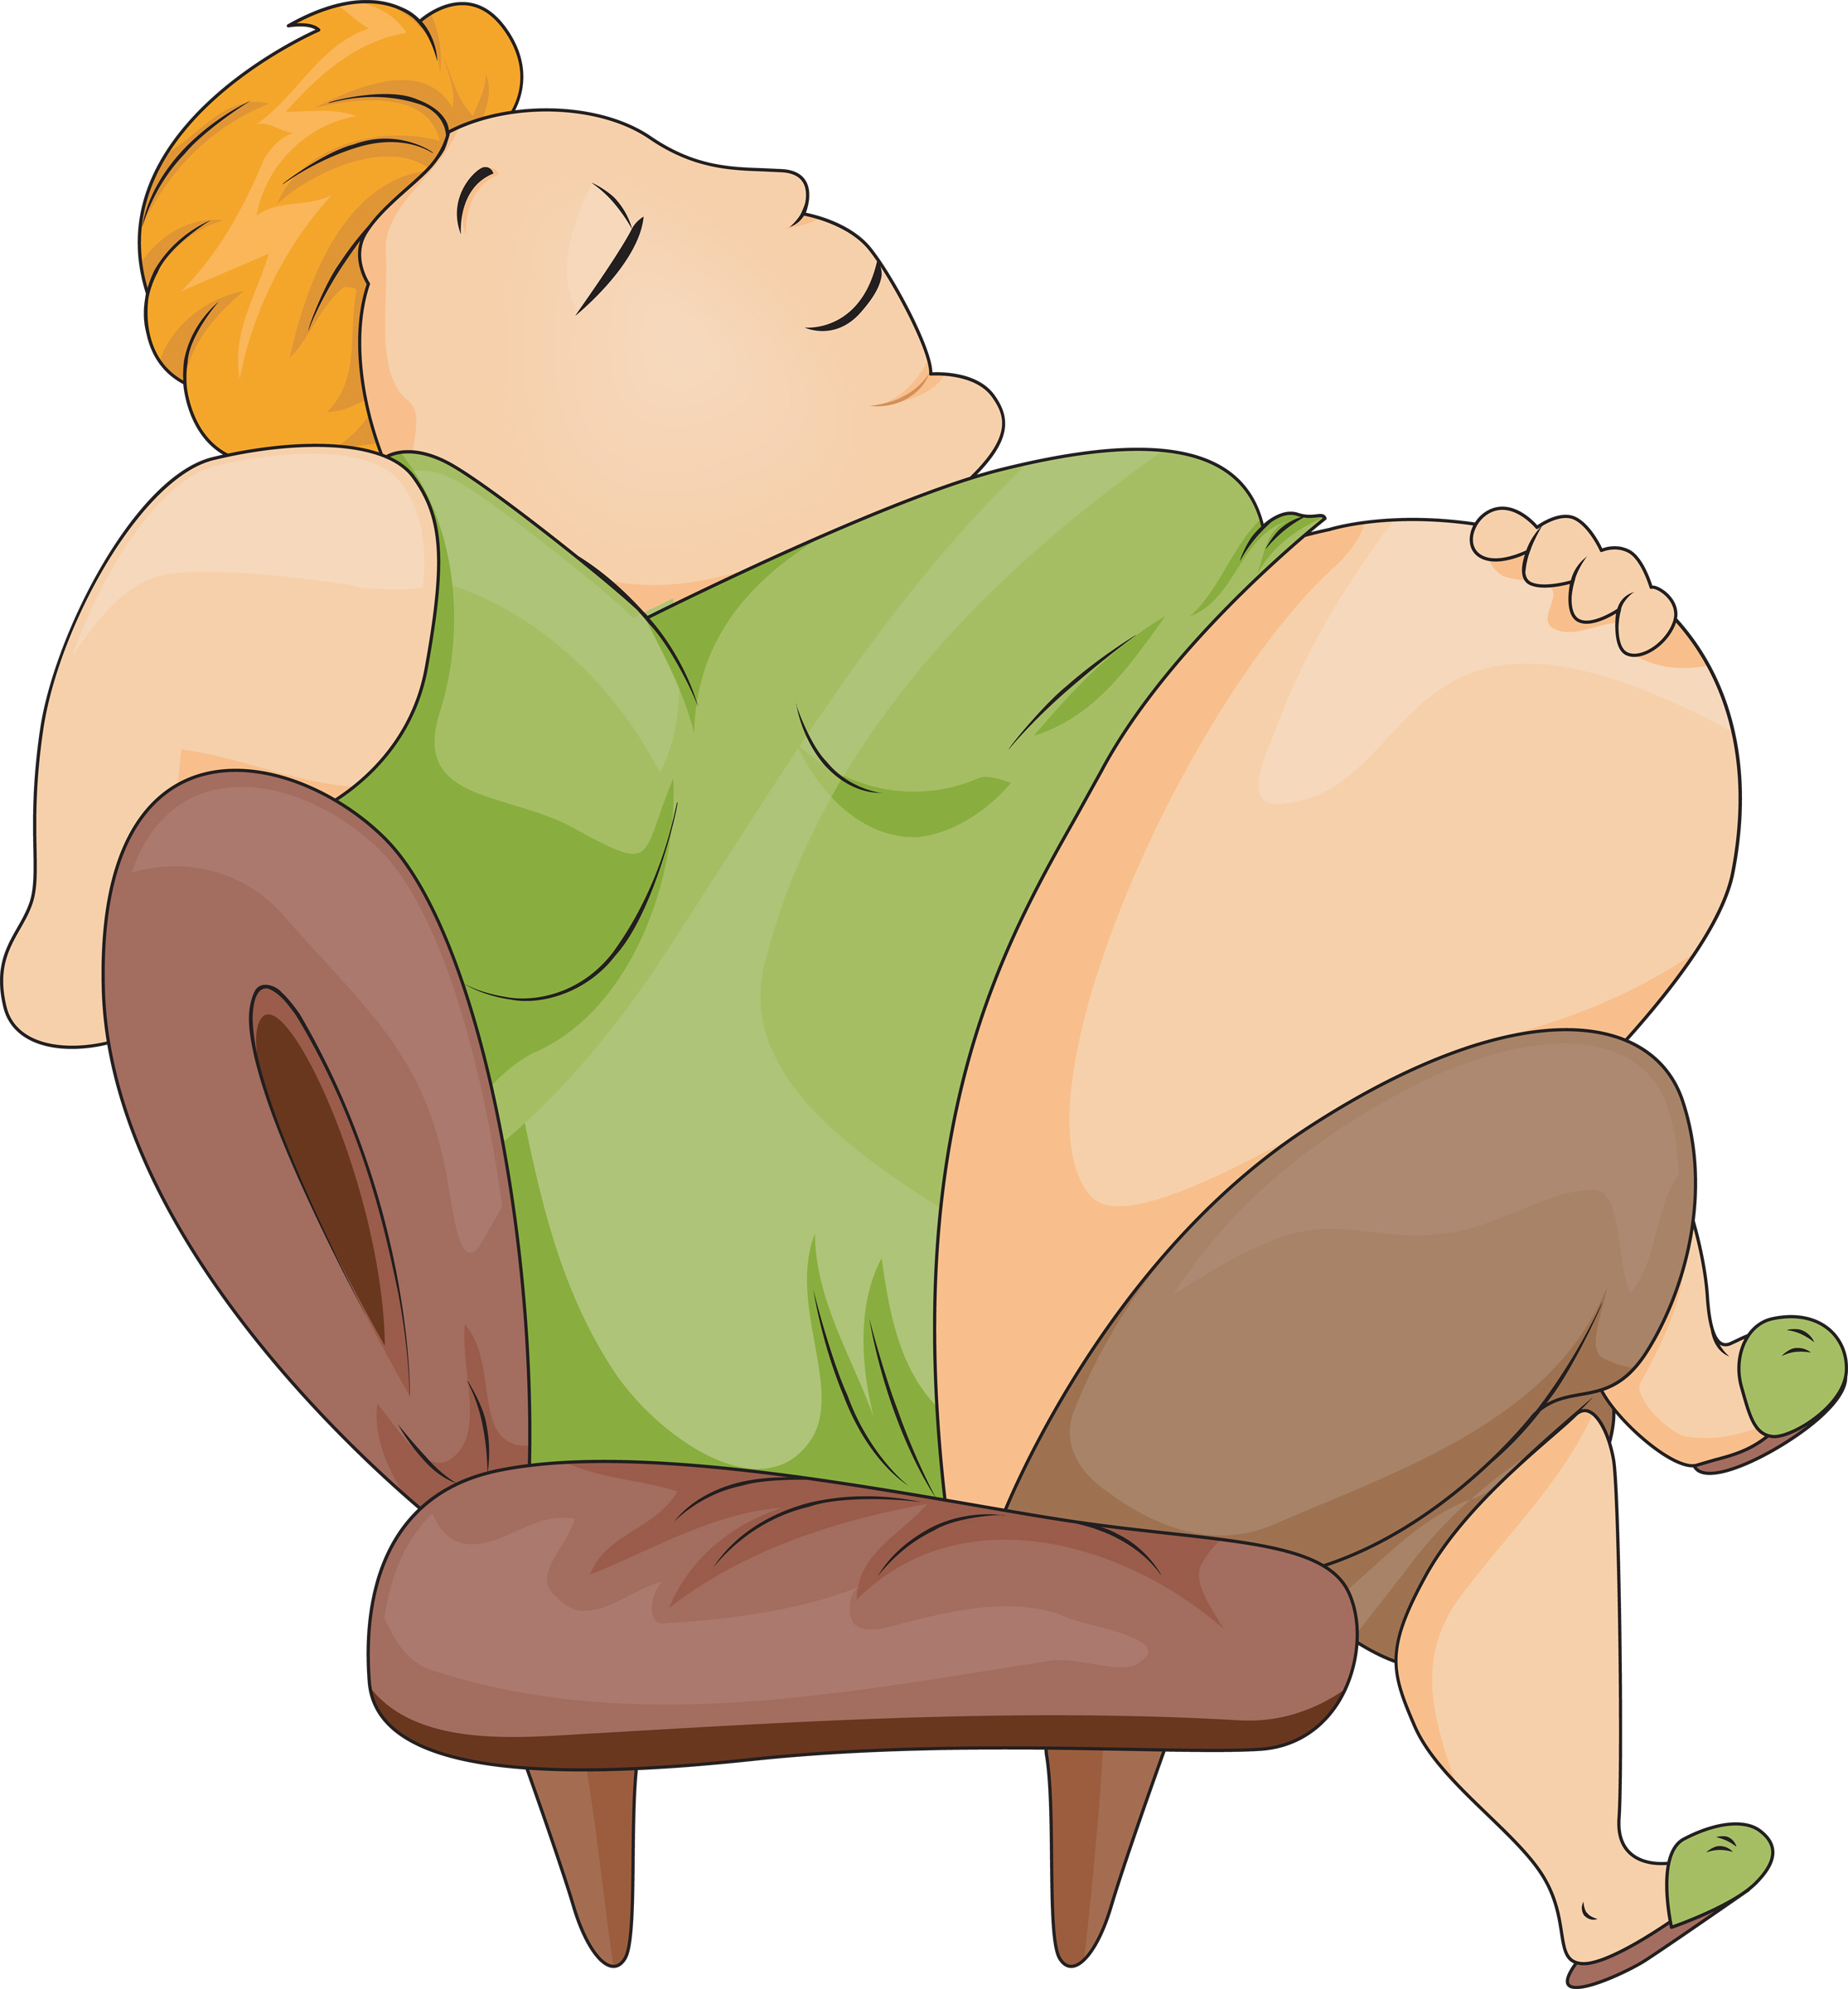 Free Full Stomach Cliparts, Download Free Clip Art, Free.